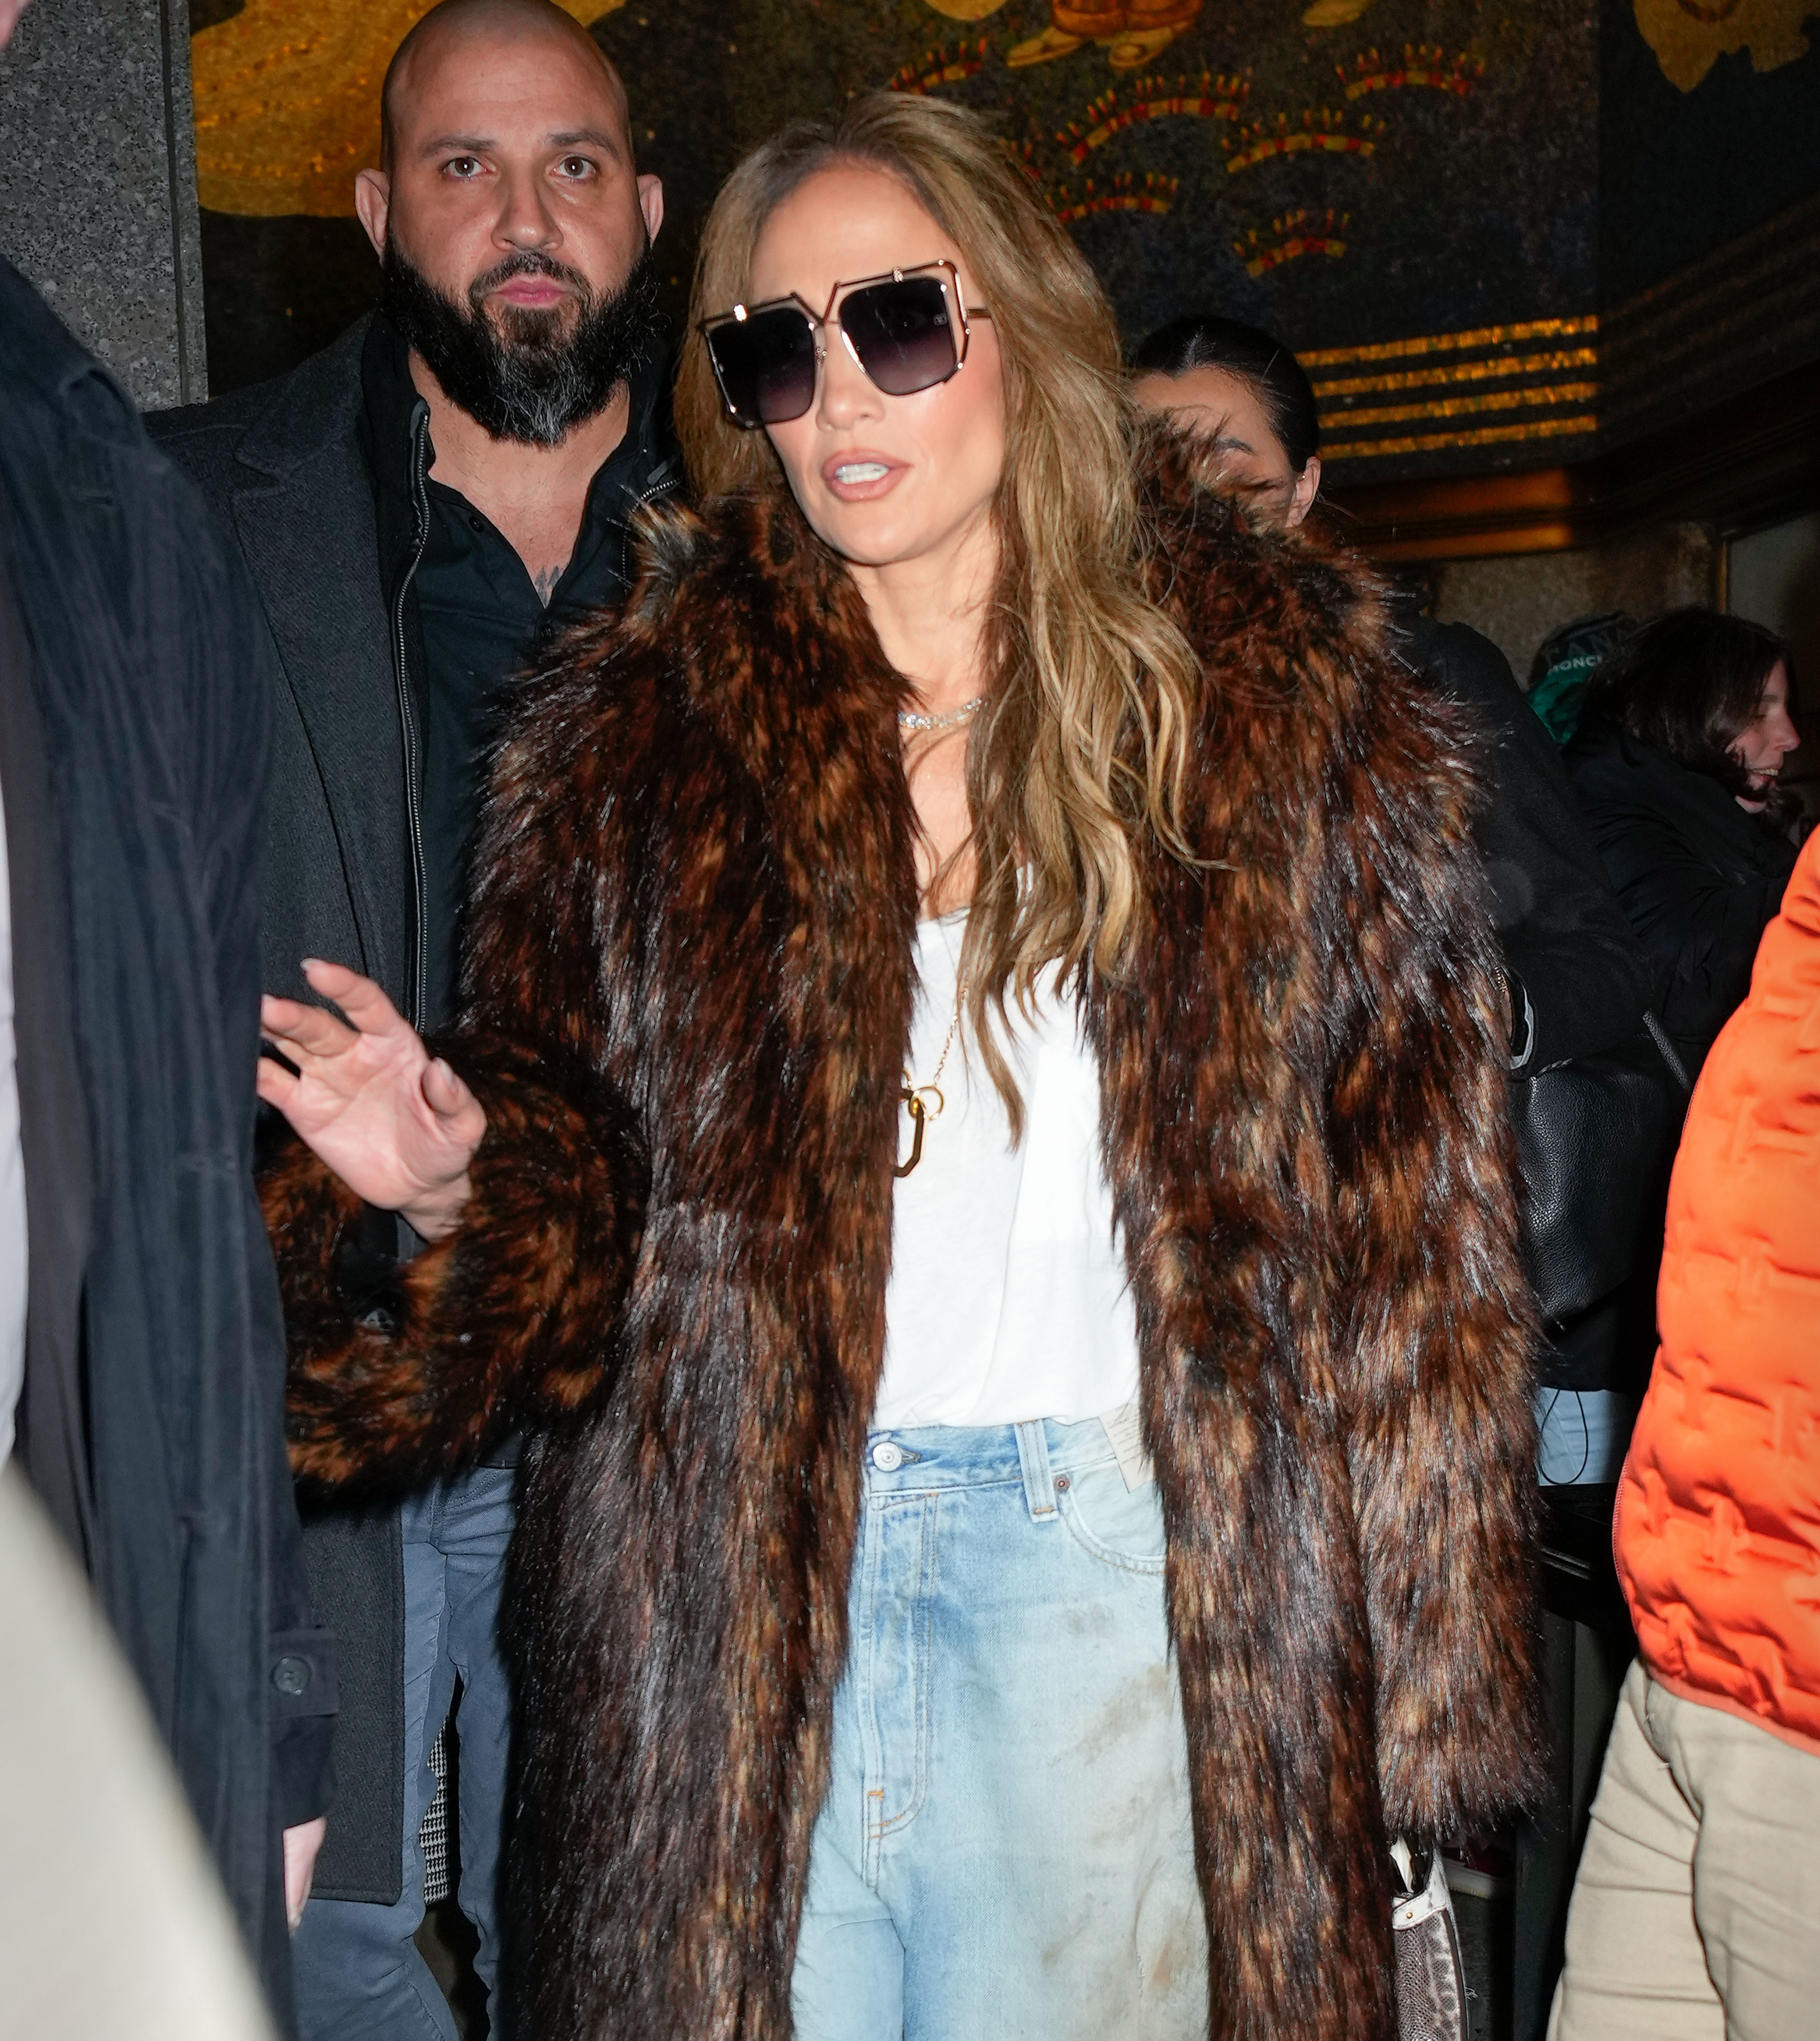 J.lo leaving a building with bodyguards around her